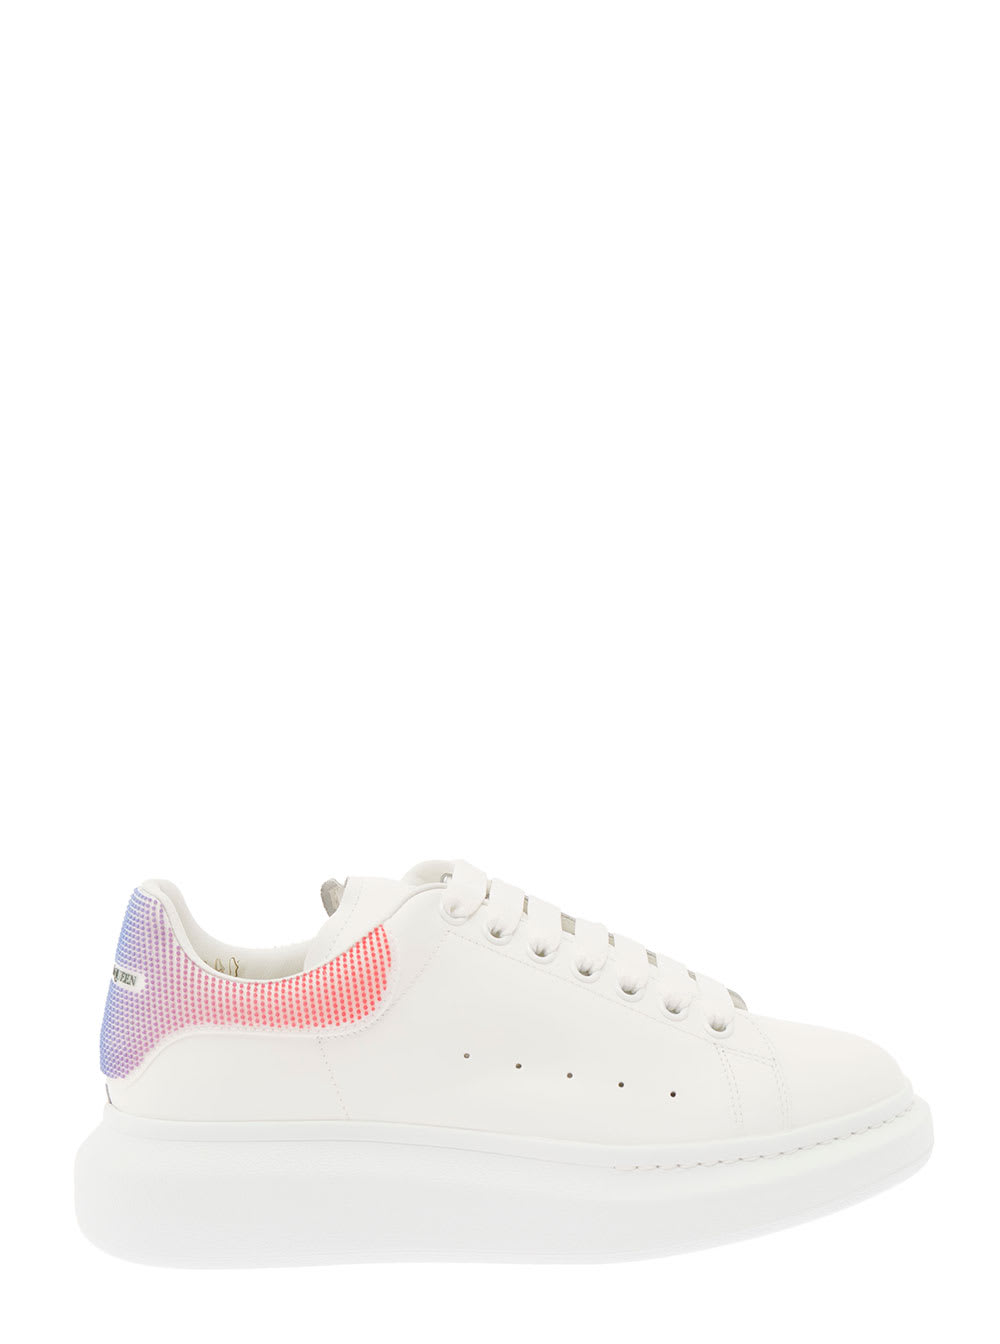 Alexander McQueen Oversize White Leather Sneakers With Micro Polka Dot Detail Alexander Mcqueen Man